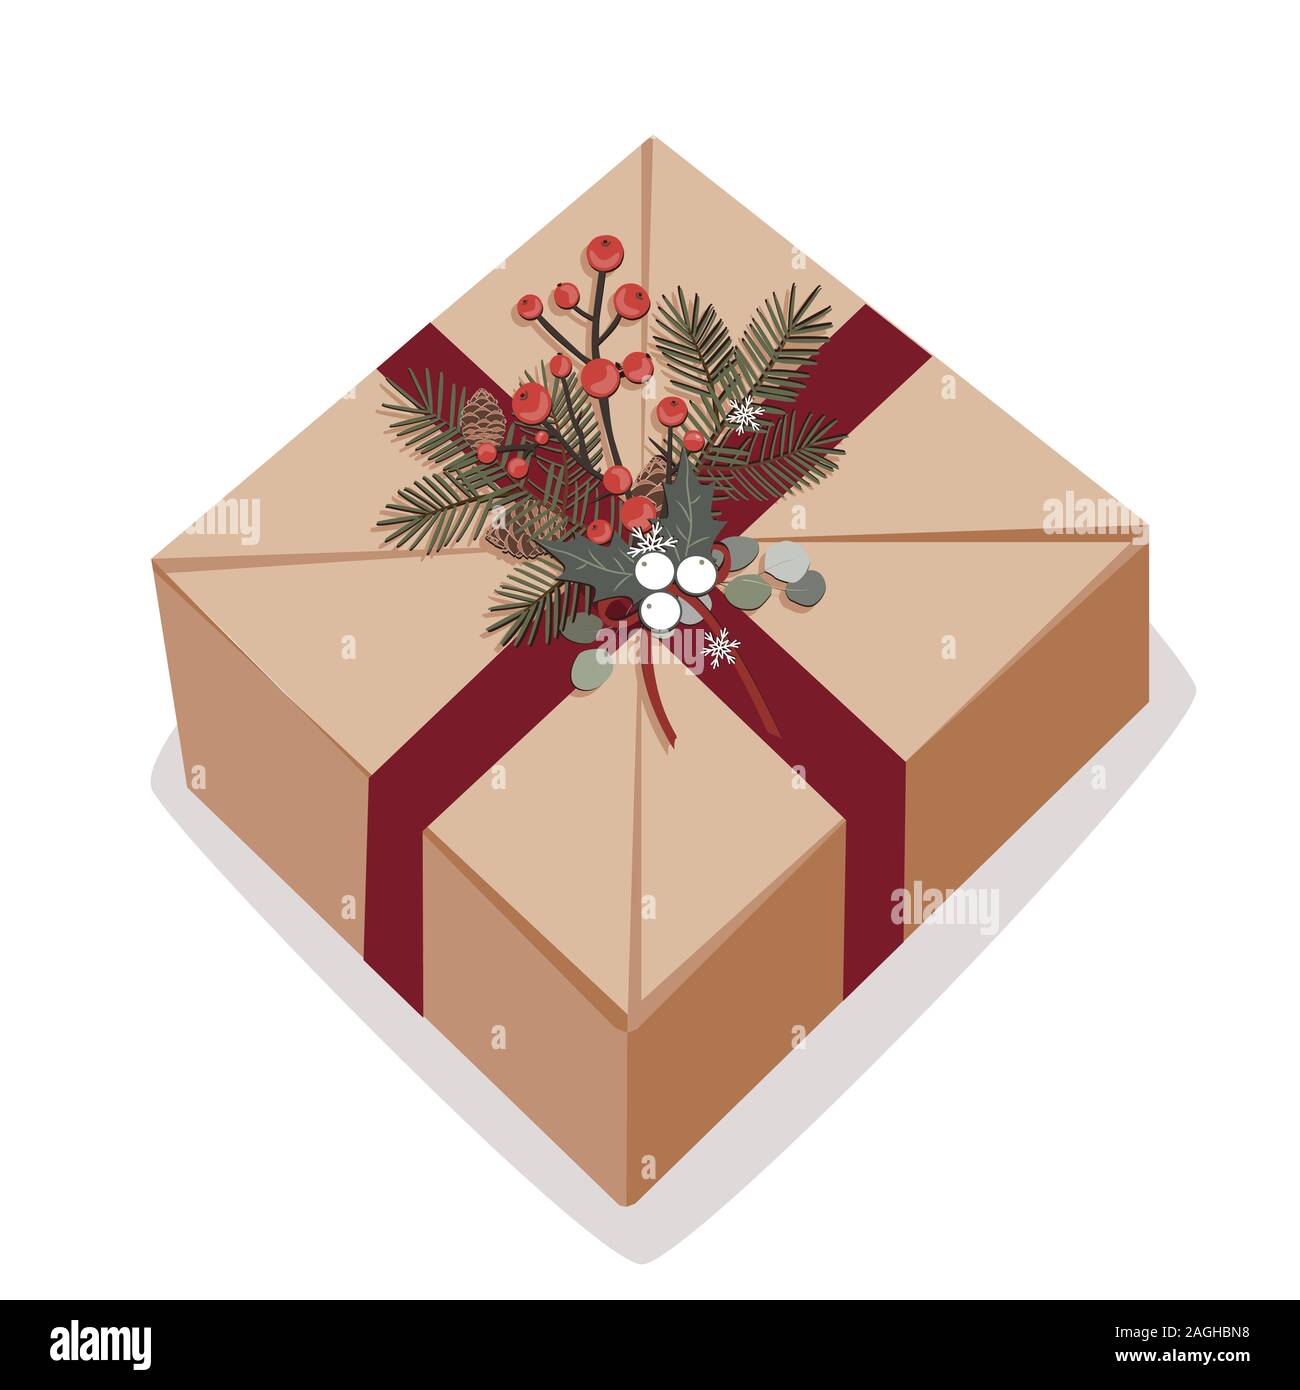 Vector illustration of Christmas box on white background. The gift is wrapped in craft paper, decorated with a ribbon, a fir and berry branches and Stock Vector